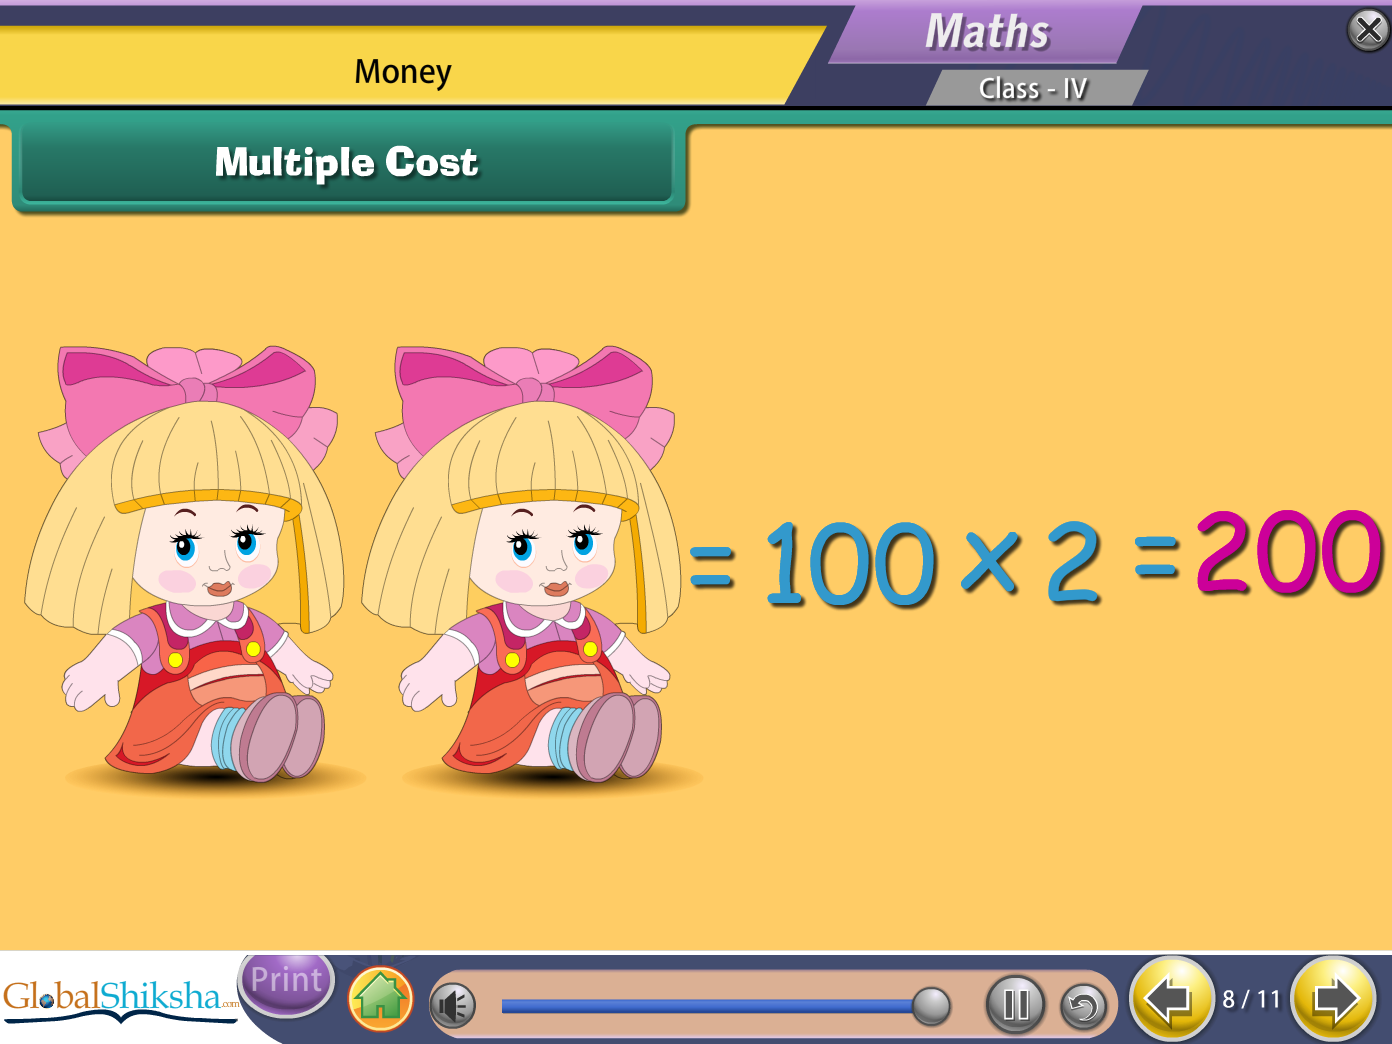 Maharashtra State Board Class 4 Maths & Science Animated Pendrive in English